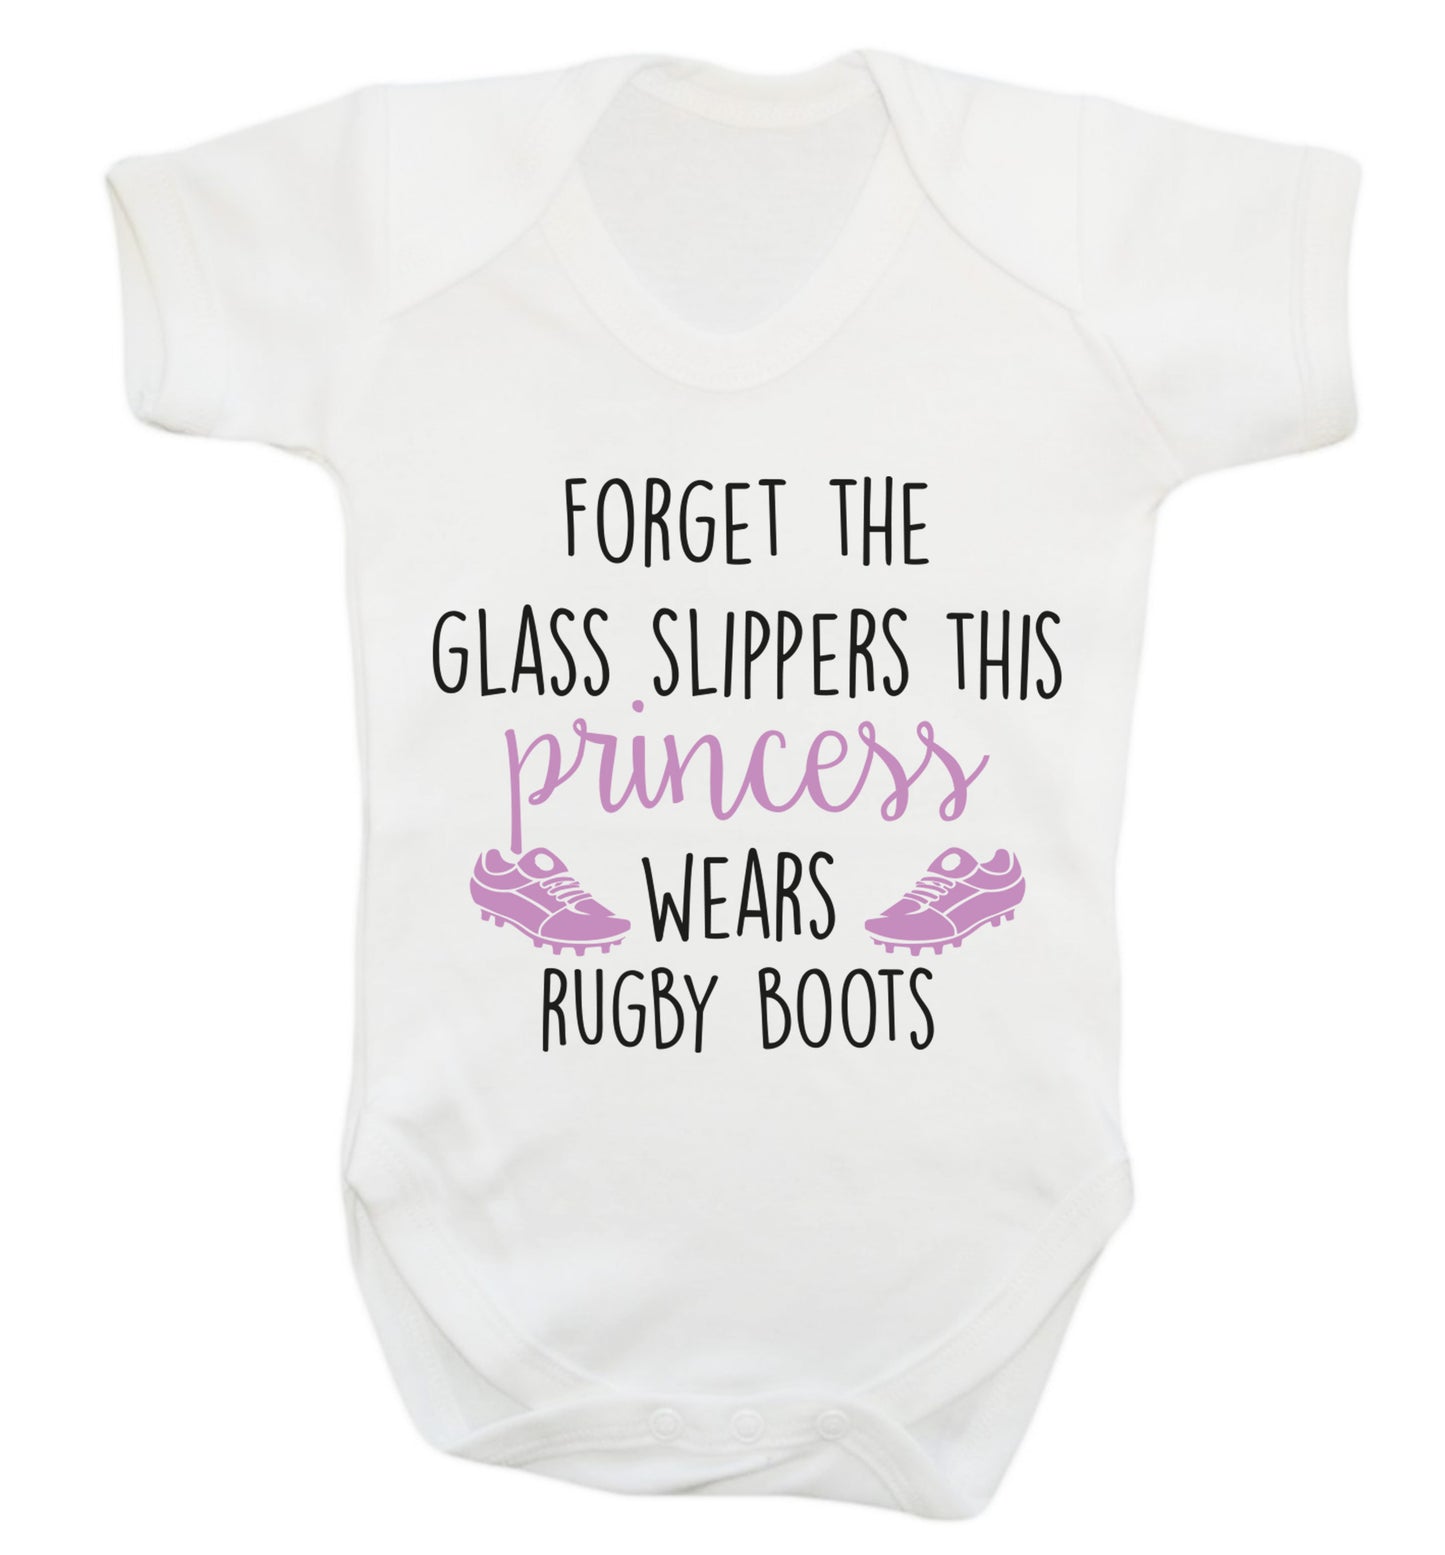 Forget the glass slippers this princess wears rugby boots Baby Vest white 18-24 months